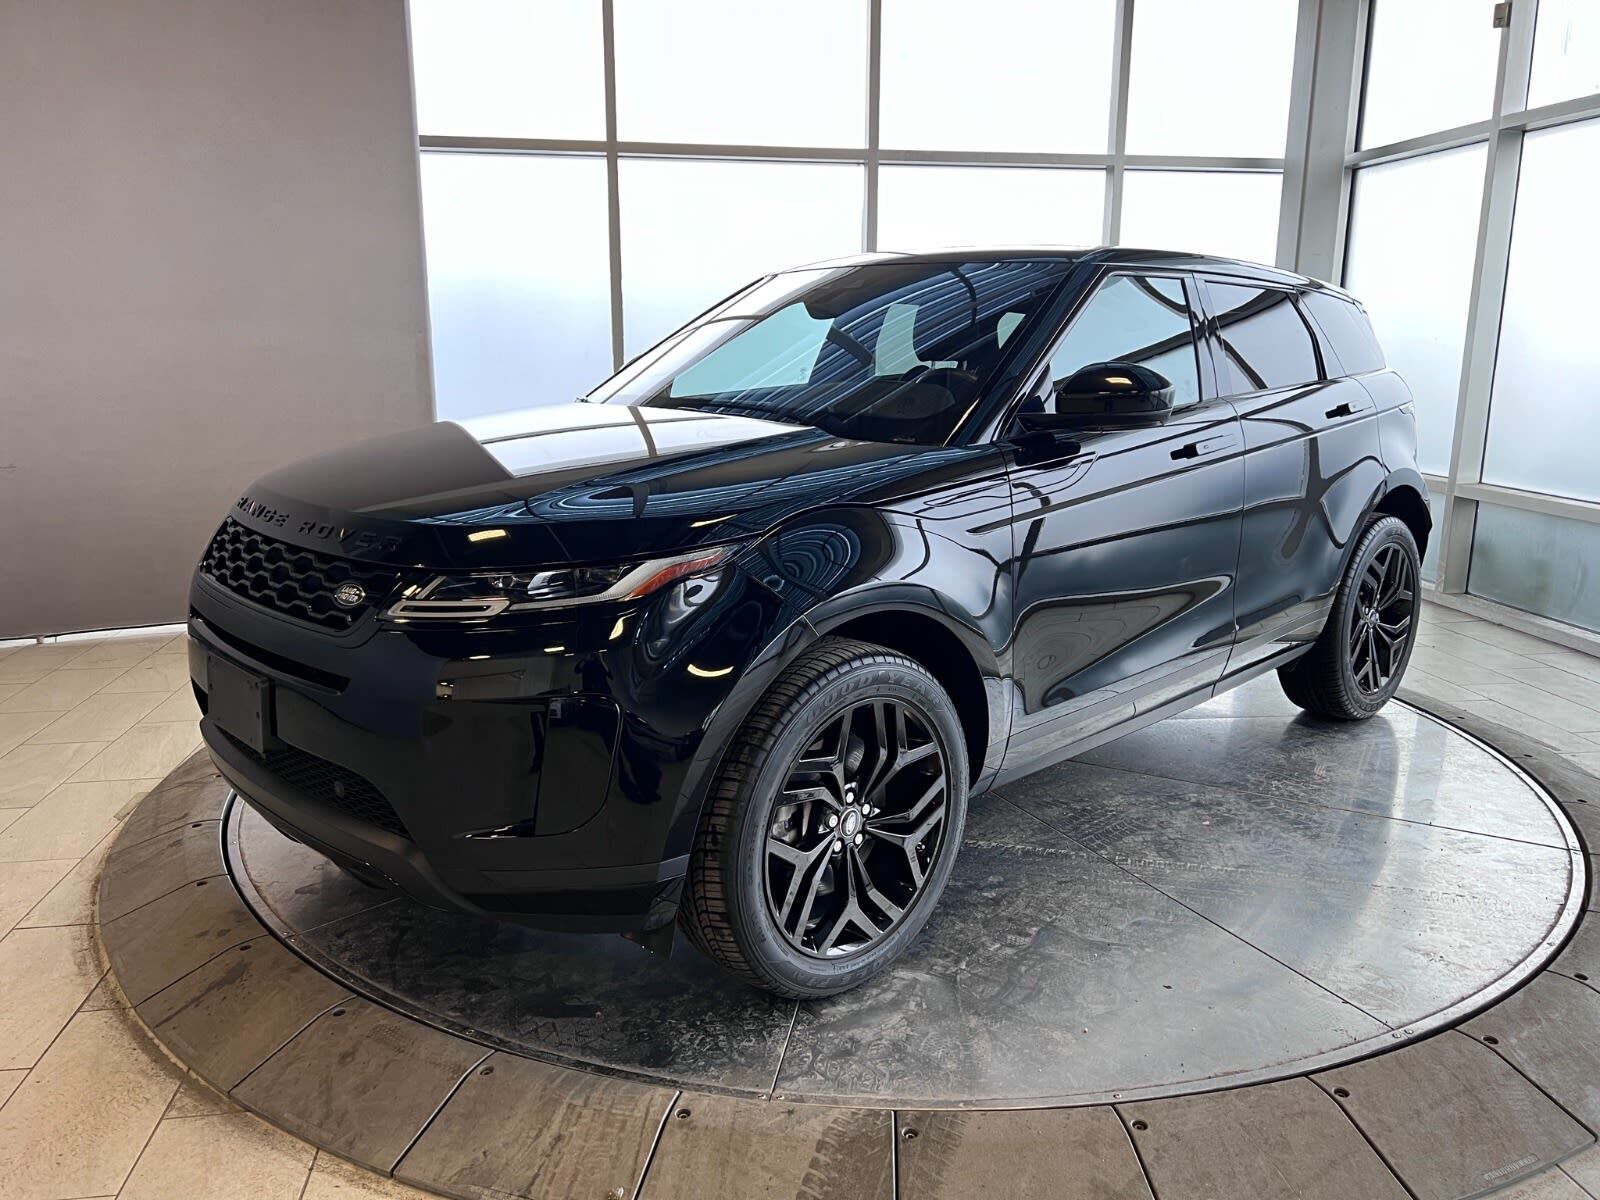 2020 Land Rover Range Rover Evoque CERTIFIED PRE OWNED RATES AS LOW AS 3.99%